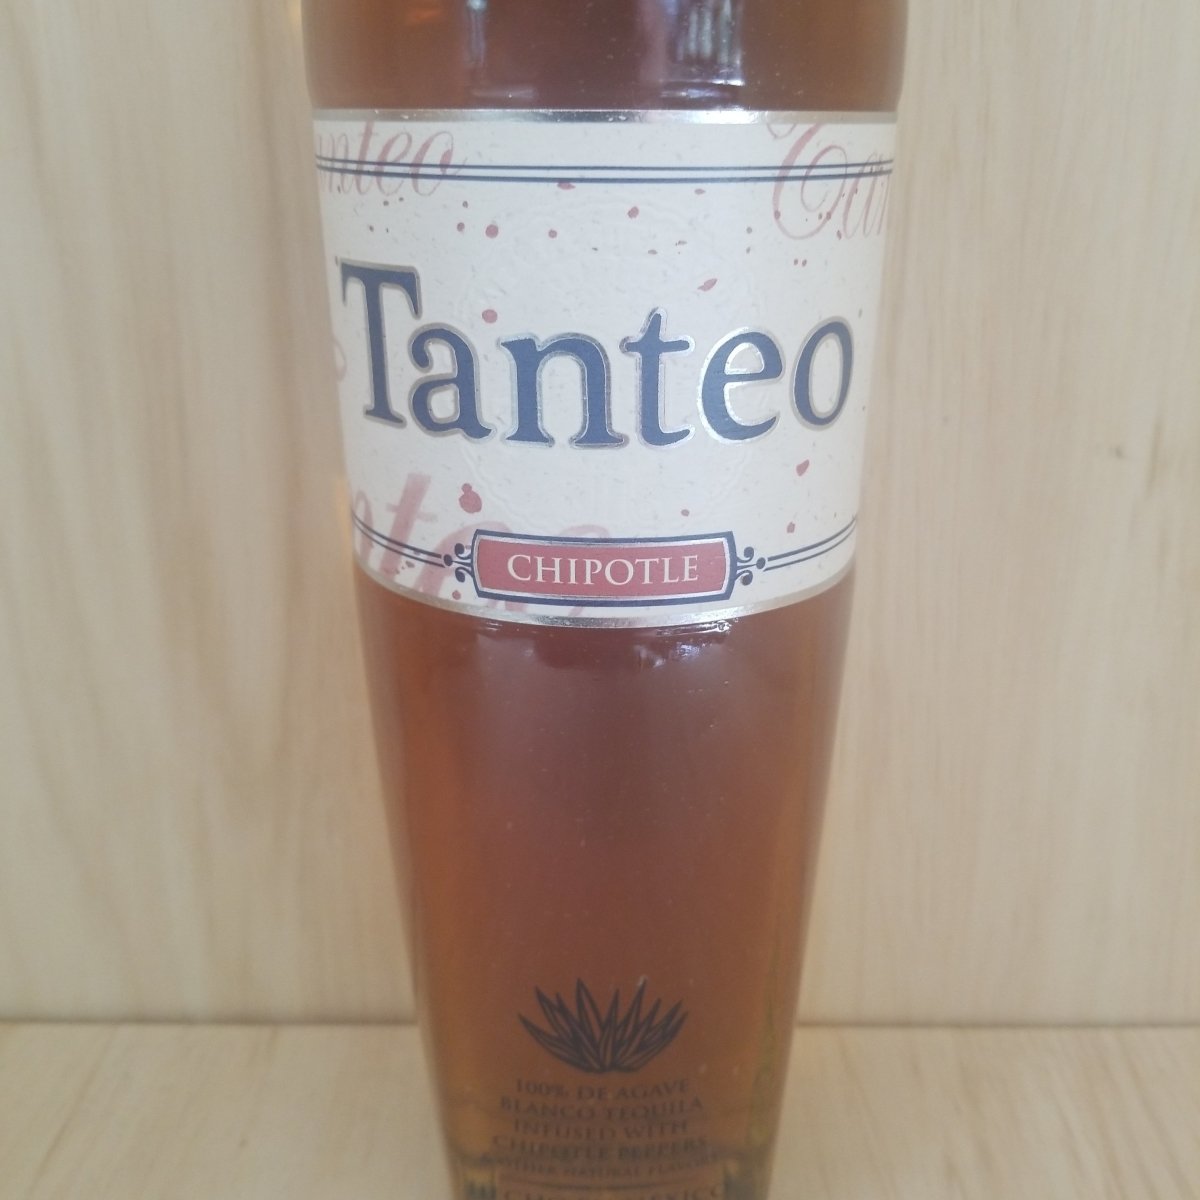 Tanteo Chipotle Tequila 750ml - Sip &amp; Say